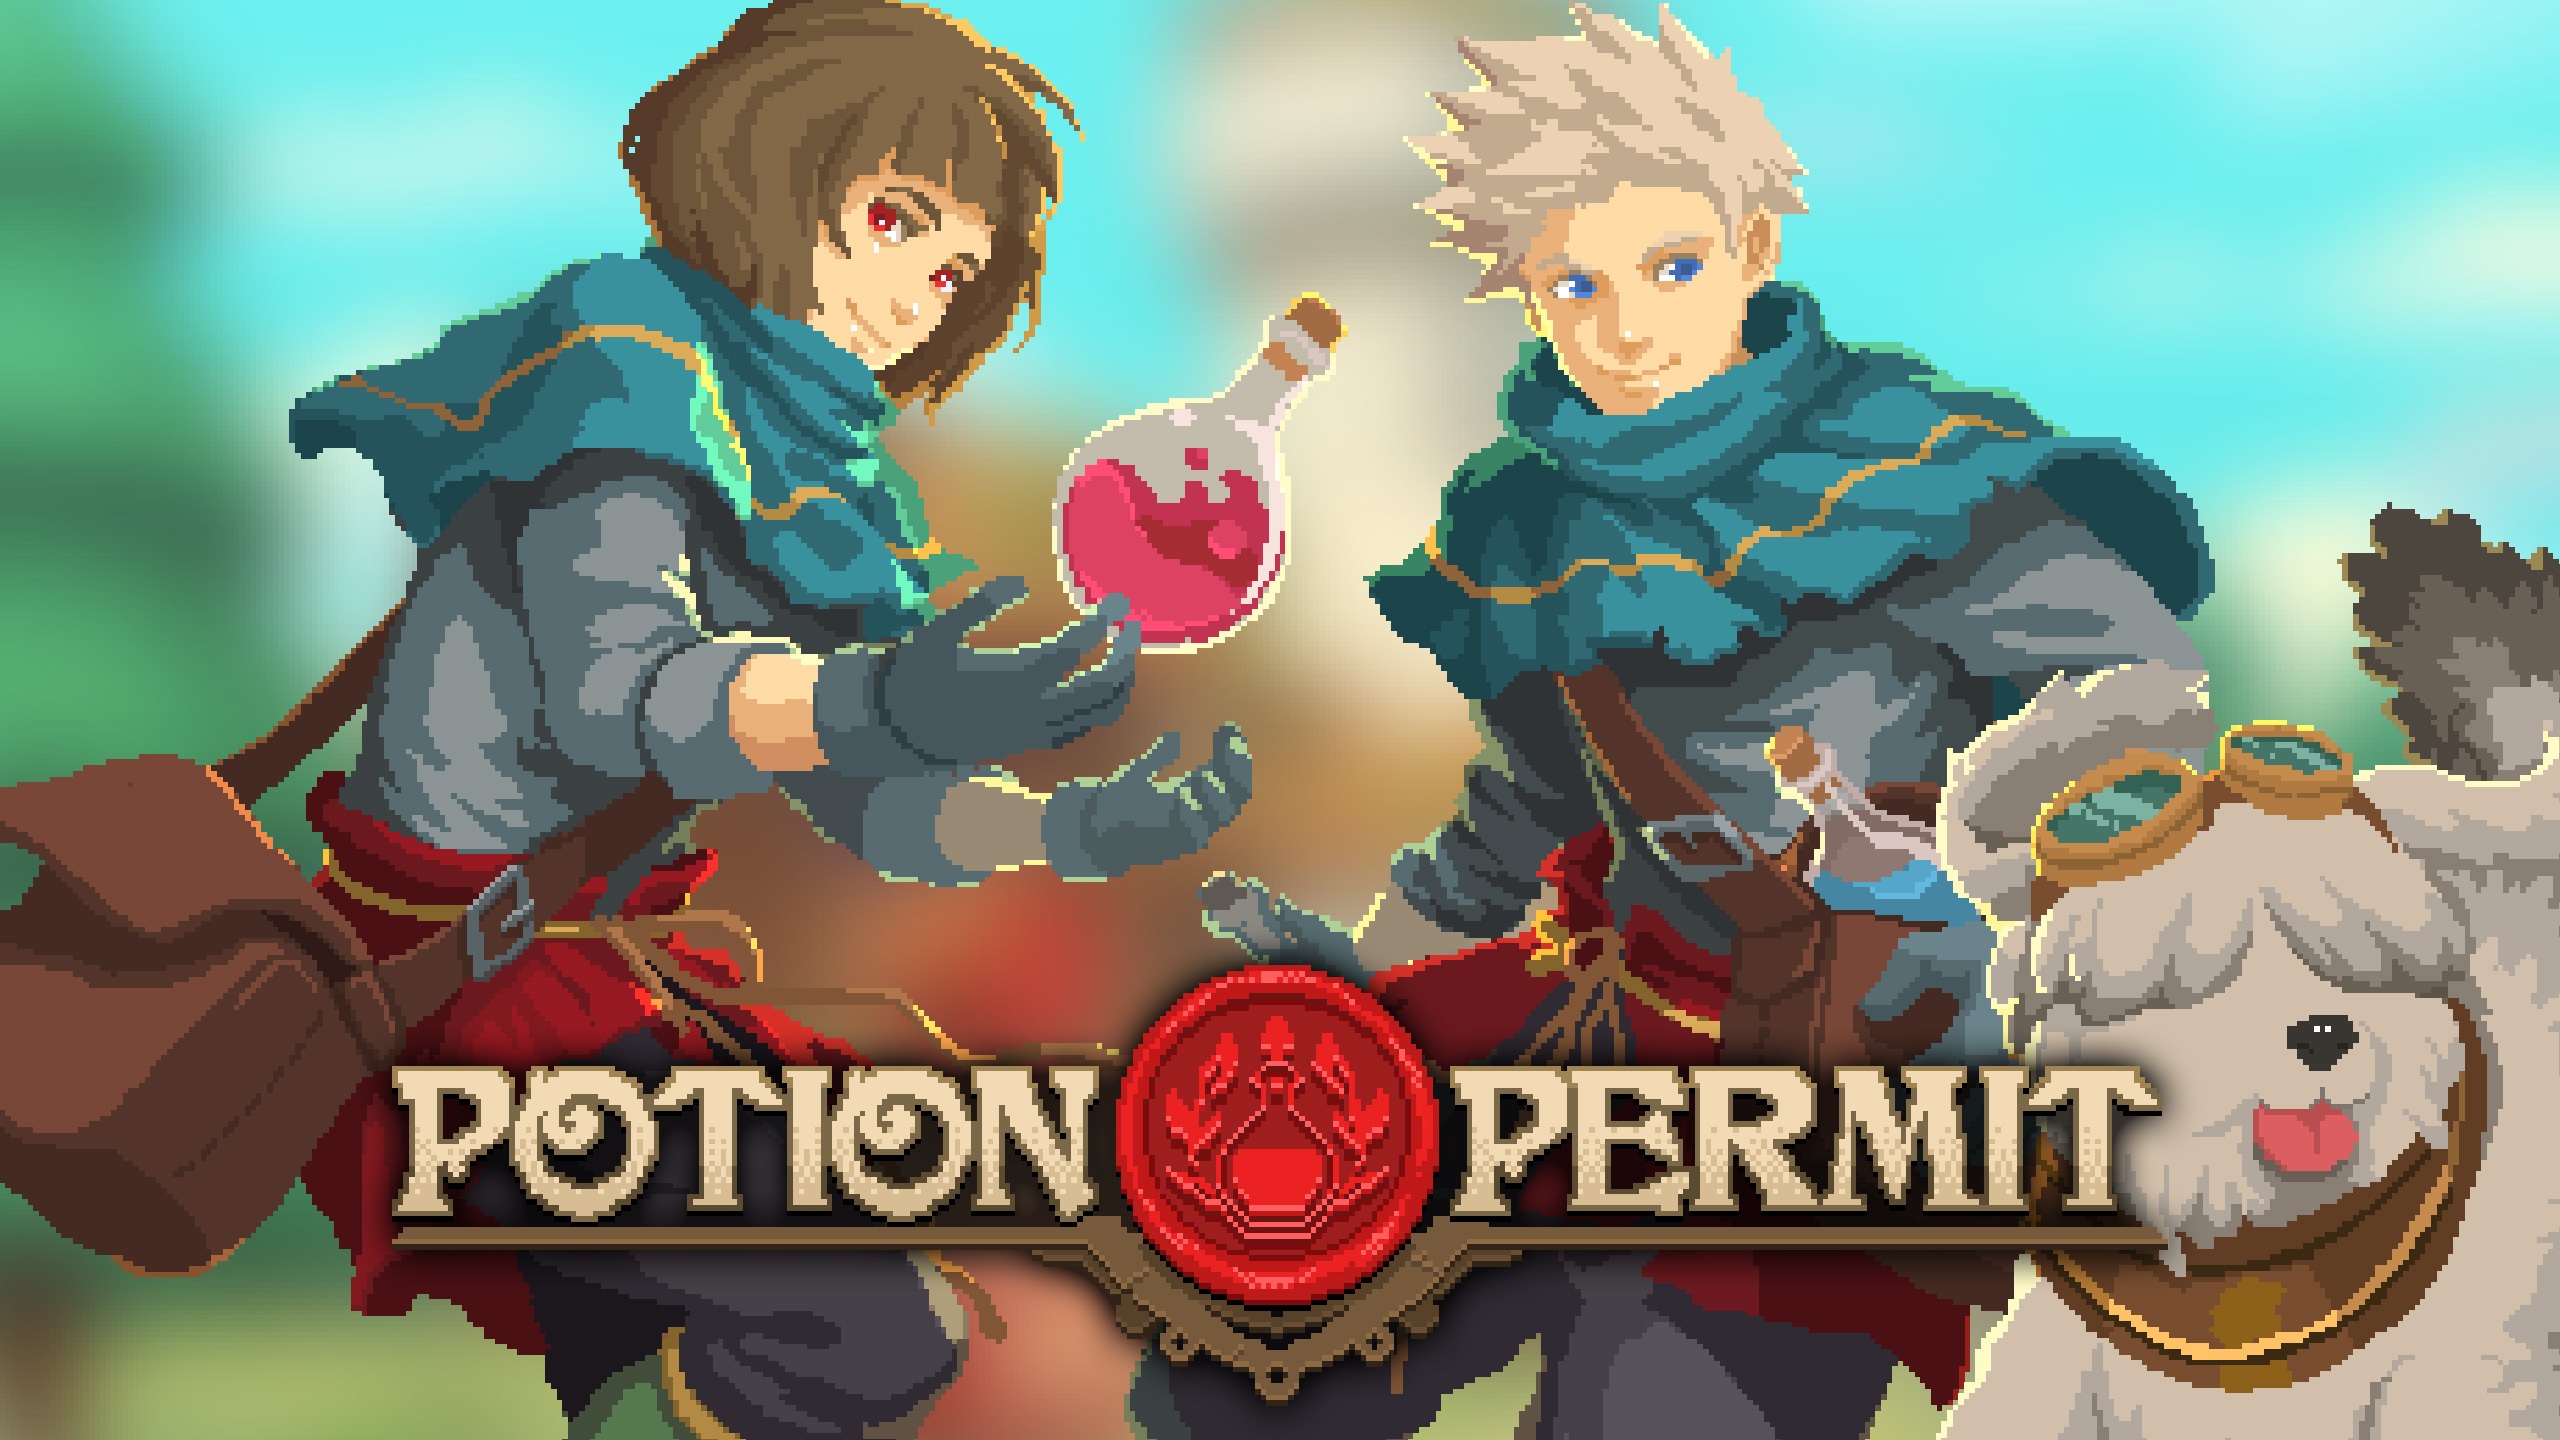 Life sim alchemy RPG Potion Permit launches in September 2022